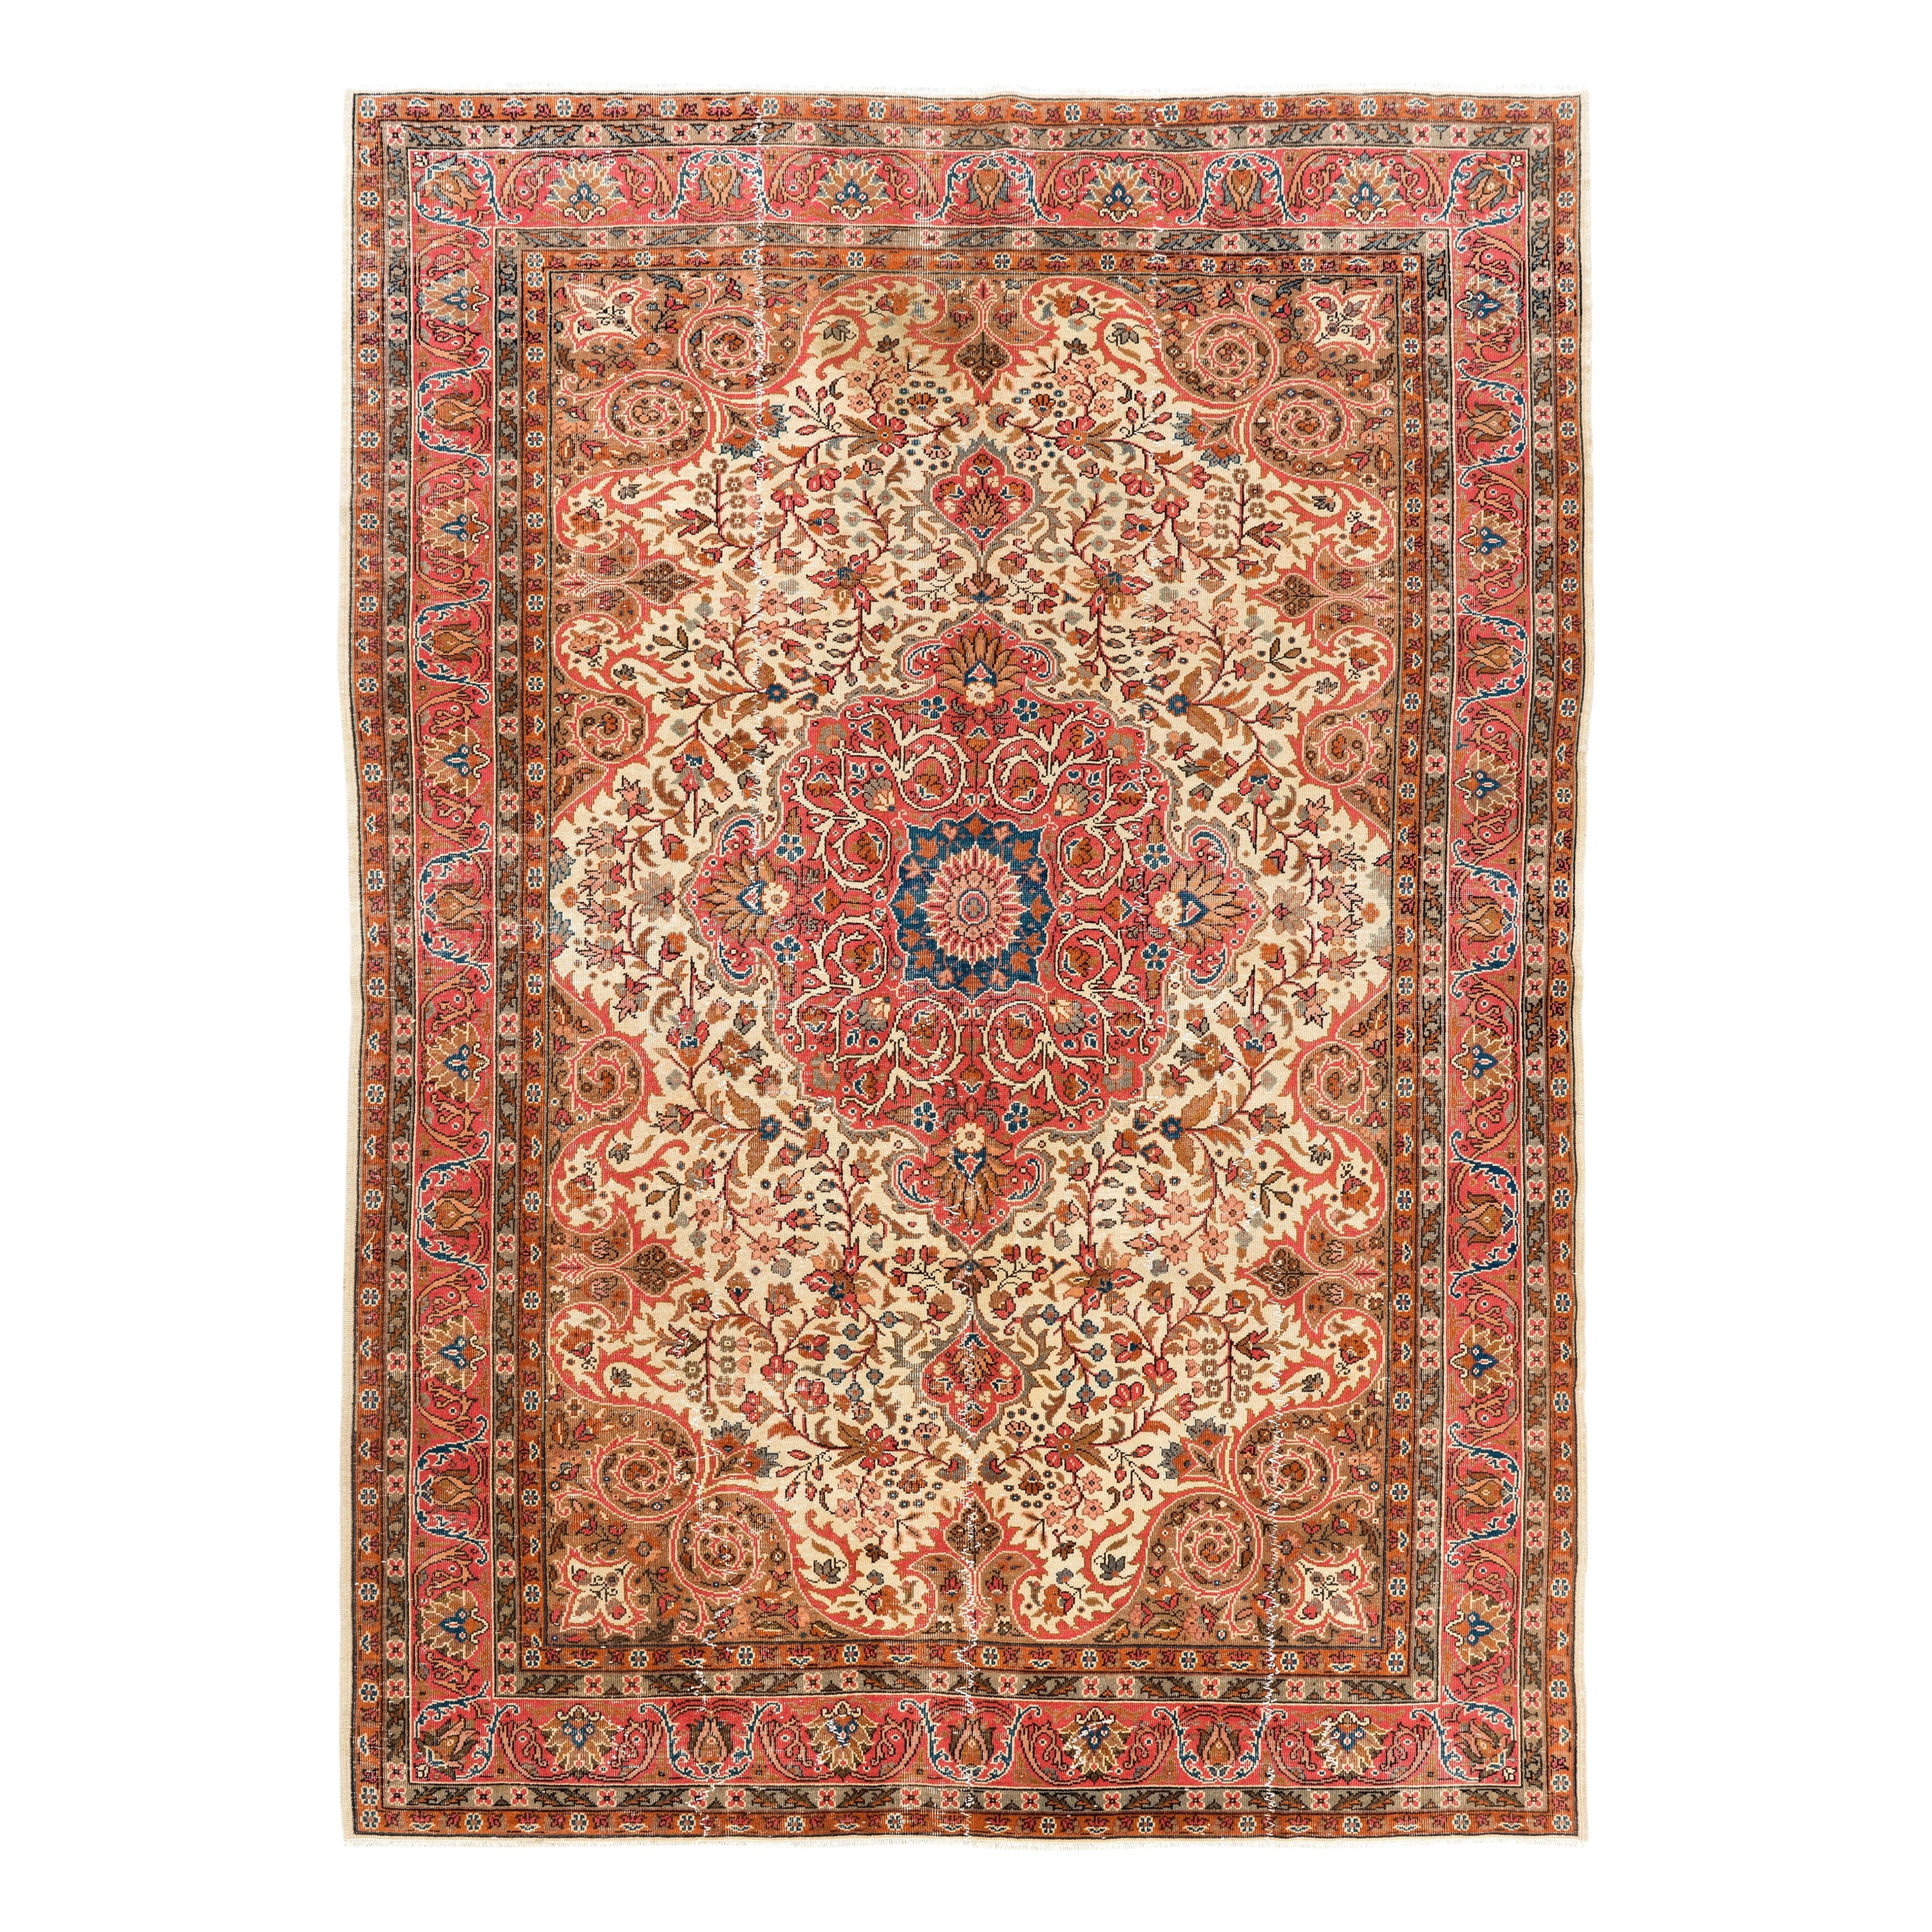 8x11 Ft Mid-Century Oriental Area Rug. Turkish Carpet for Traditional Interiors For Sale